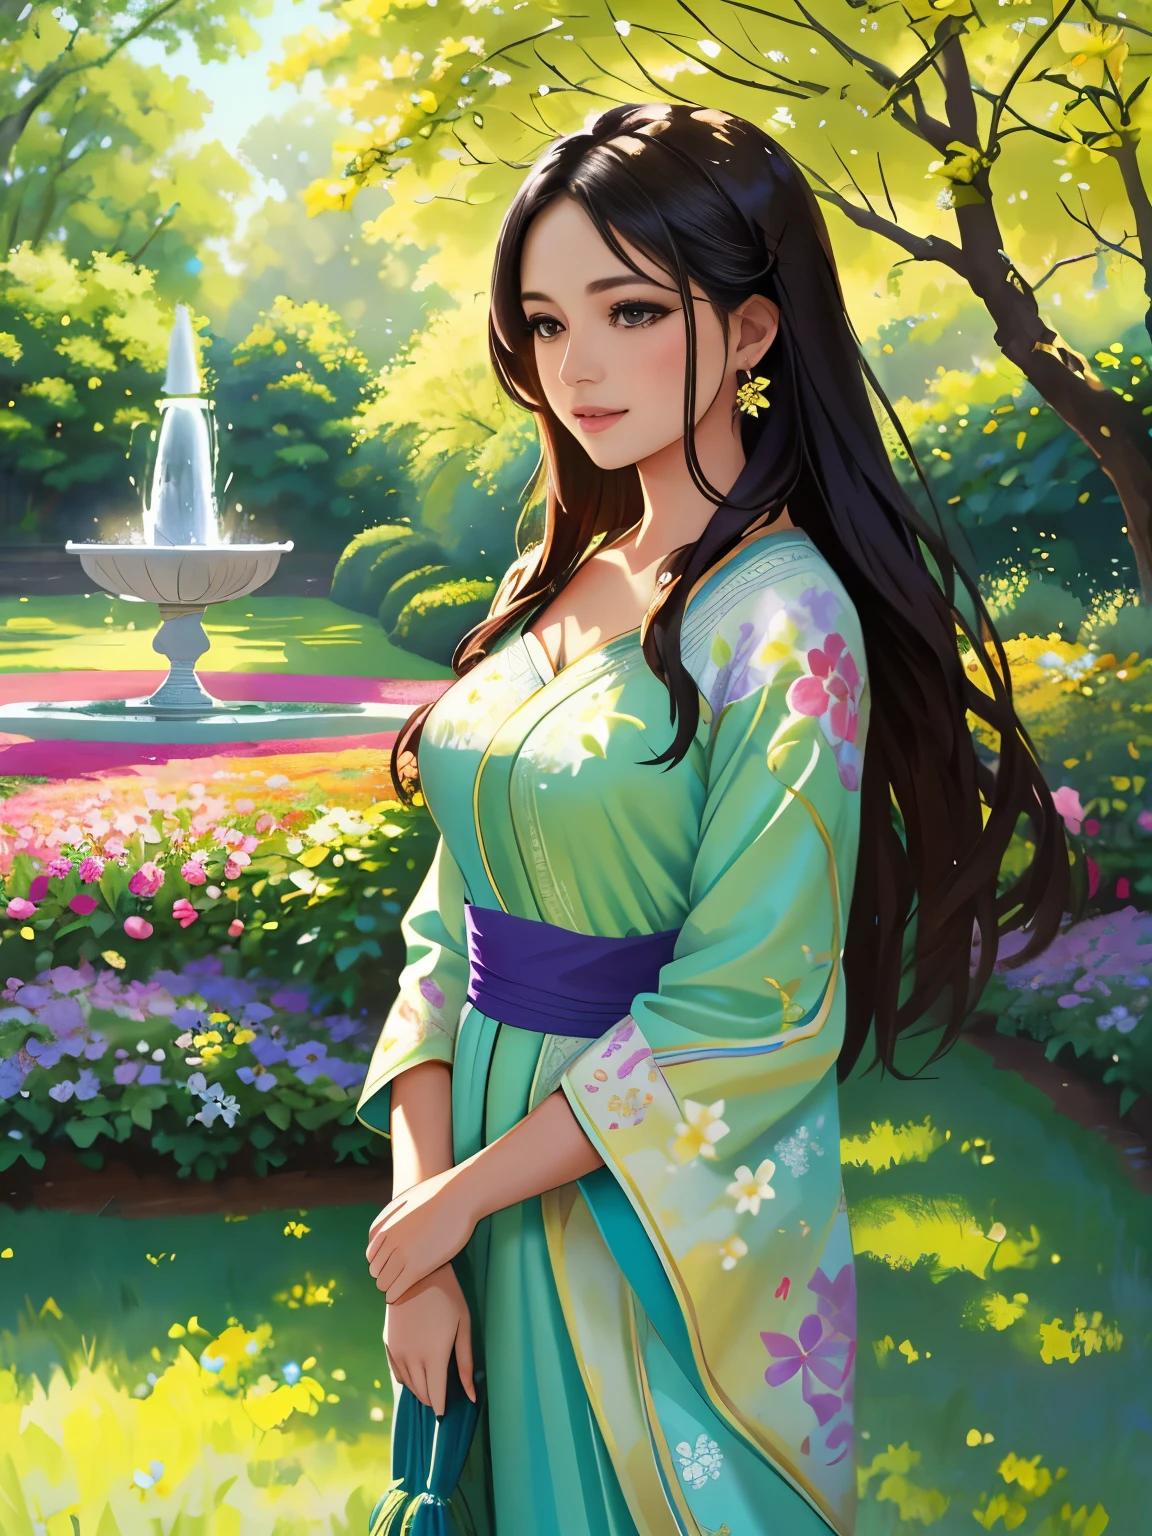 A girl standing in a vibrant flower garden, surrounded by colorful blossoms and tall green trees. She is wearing a flowing dress with intricate floral patterns, and her long, flowing hair is gently swaying in the breeze. The girl has beautiful detailed eyes and full, luscious lips, giving her a serene and captivating expression. The garden is bathed in warm sunlight, casting soft shadows on the grass and flowers. The overall image has the best quality, with ultra-detailed and photo-realistic features. The colors are vivid and vibrant, enhancing the beauty of the scene. The lighting is soft and natural, creating a warm and inviting atmosphere. The artwork is created using a combination of traditional painting techniques and digital rendering, resulting in a unique and visually stunning piece.